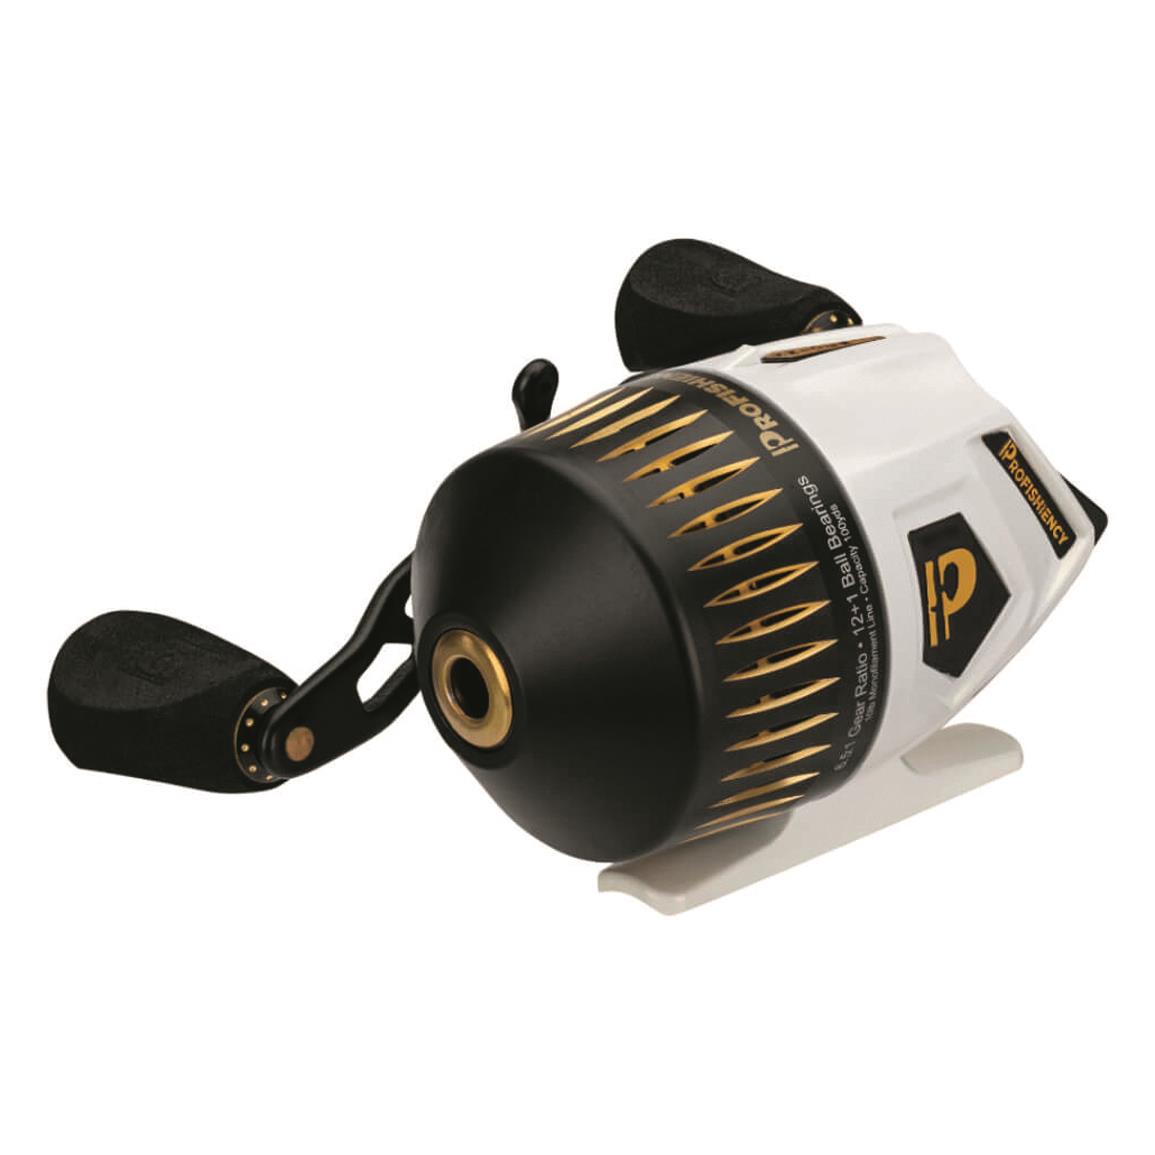 Zebco 33 Gold Micro Triggerspin Reel - 714369, Spincast Reels at